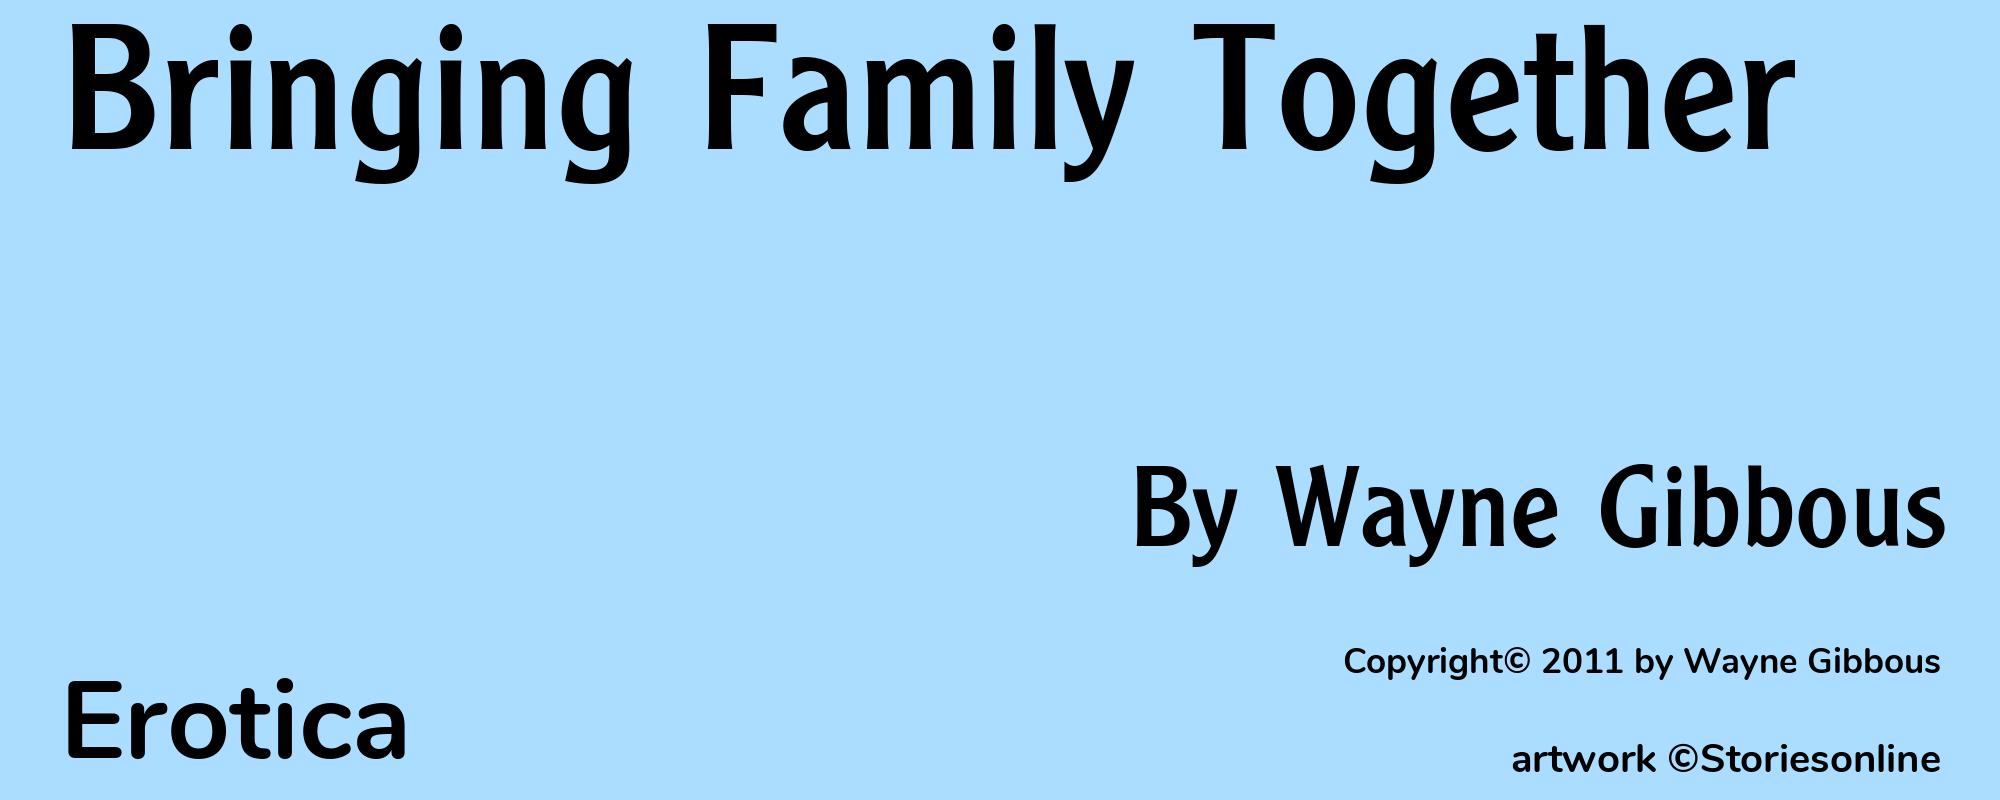 Bringing Family Together - Cover